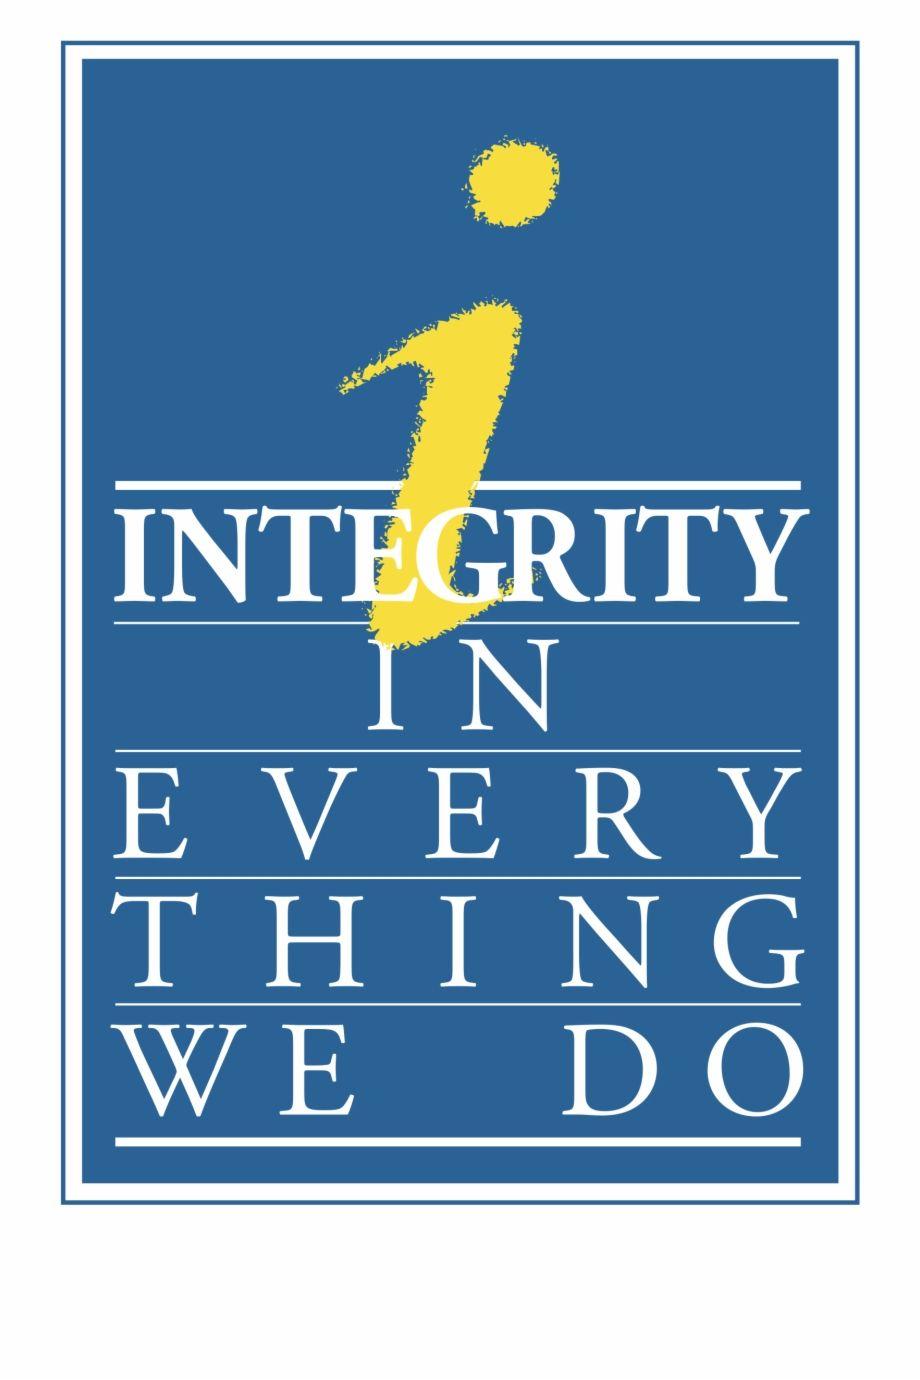 Hig Logo - Integrity In Every Thing We Do Logo Png Transparent.i.g. Capital